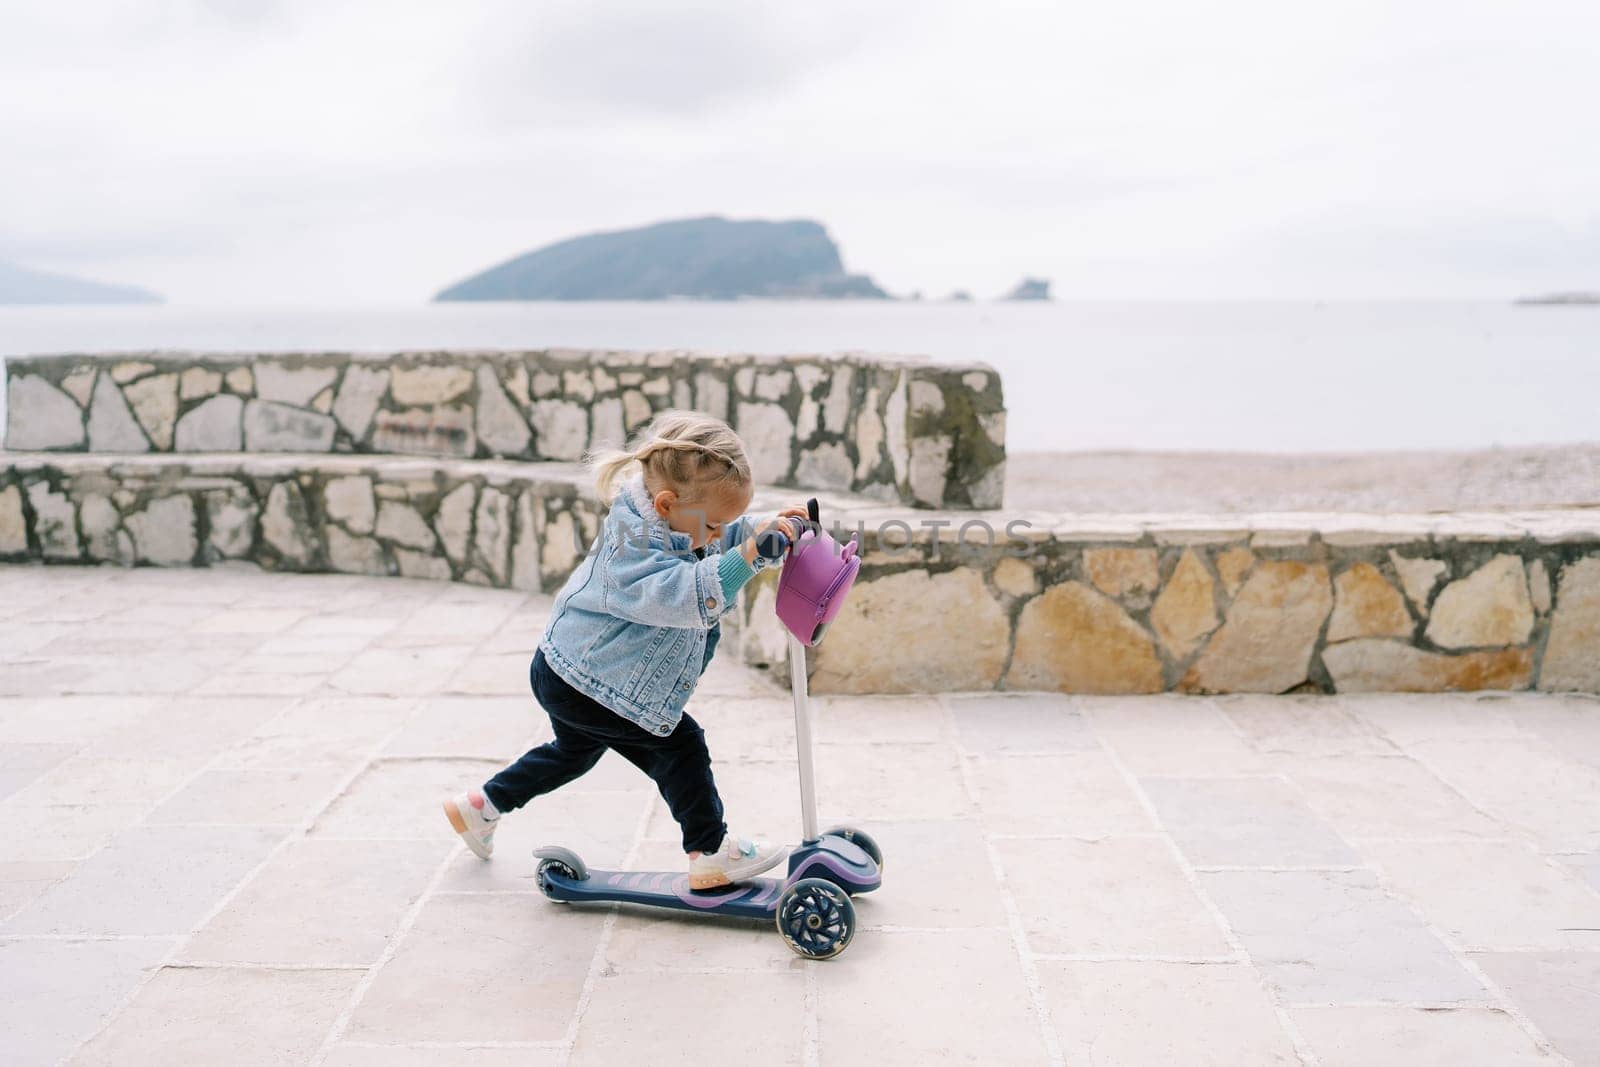 Little girl rides a scooter on a paved area near the sea looking down at her feet by Nadtochiy